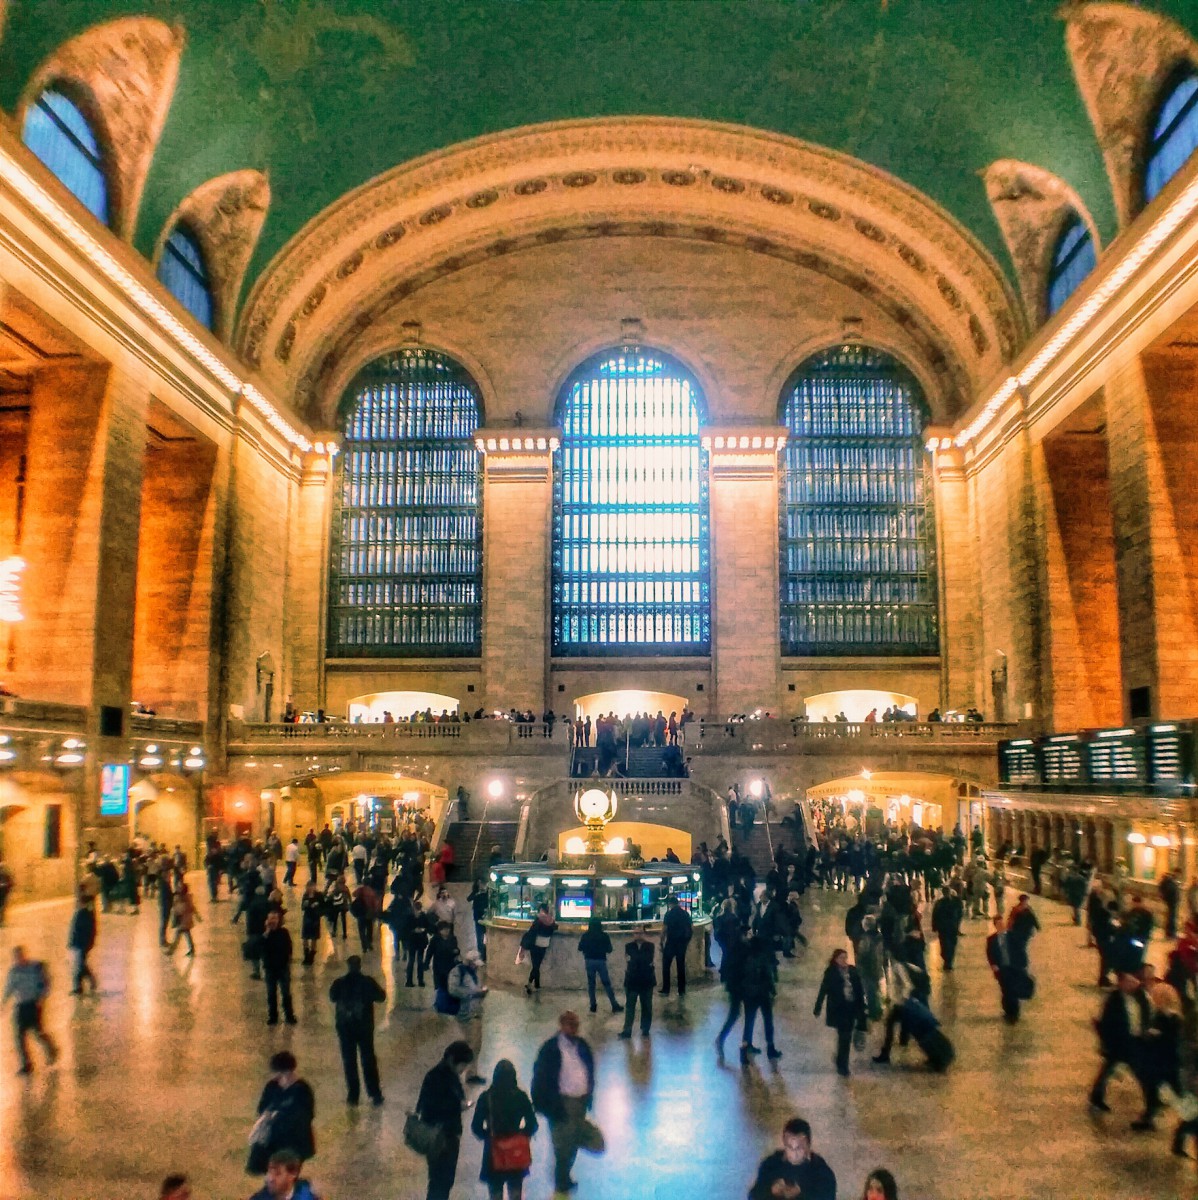 the interior of Grand Central Station